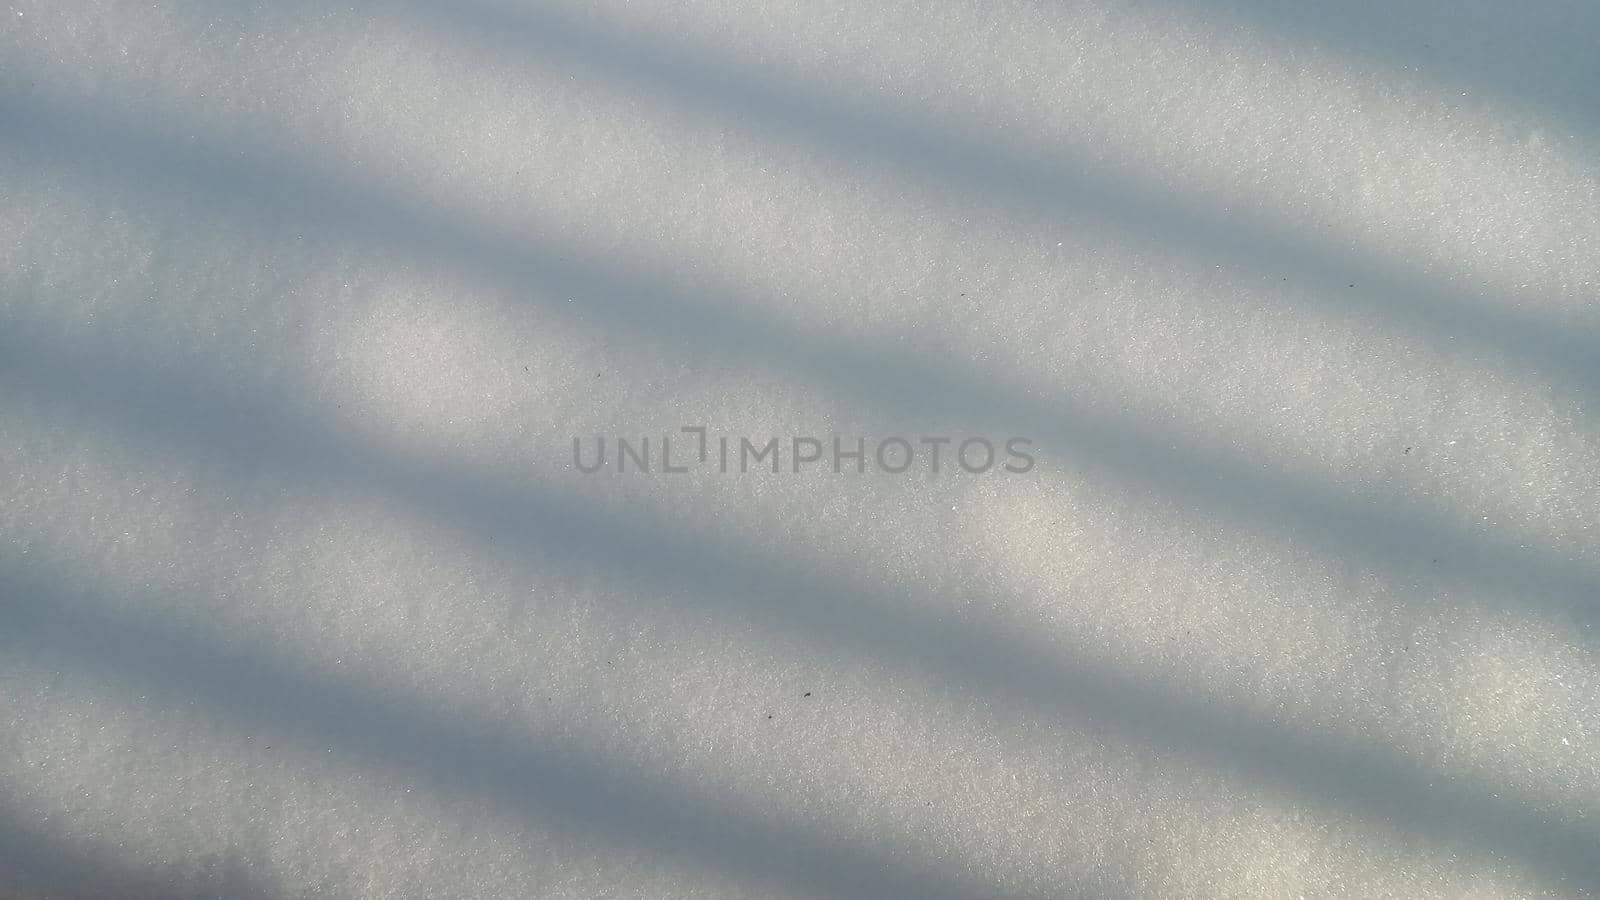 Background with natural snow texture, close-up from above. Shadow in the form of straight lines on a snowy surface, abstract background.